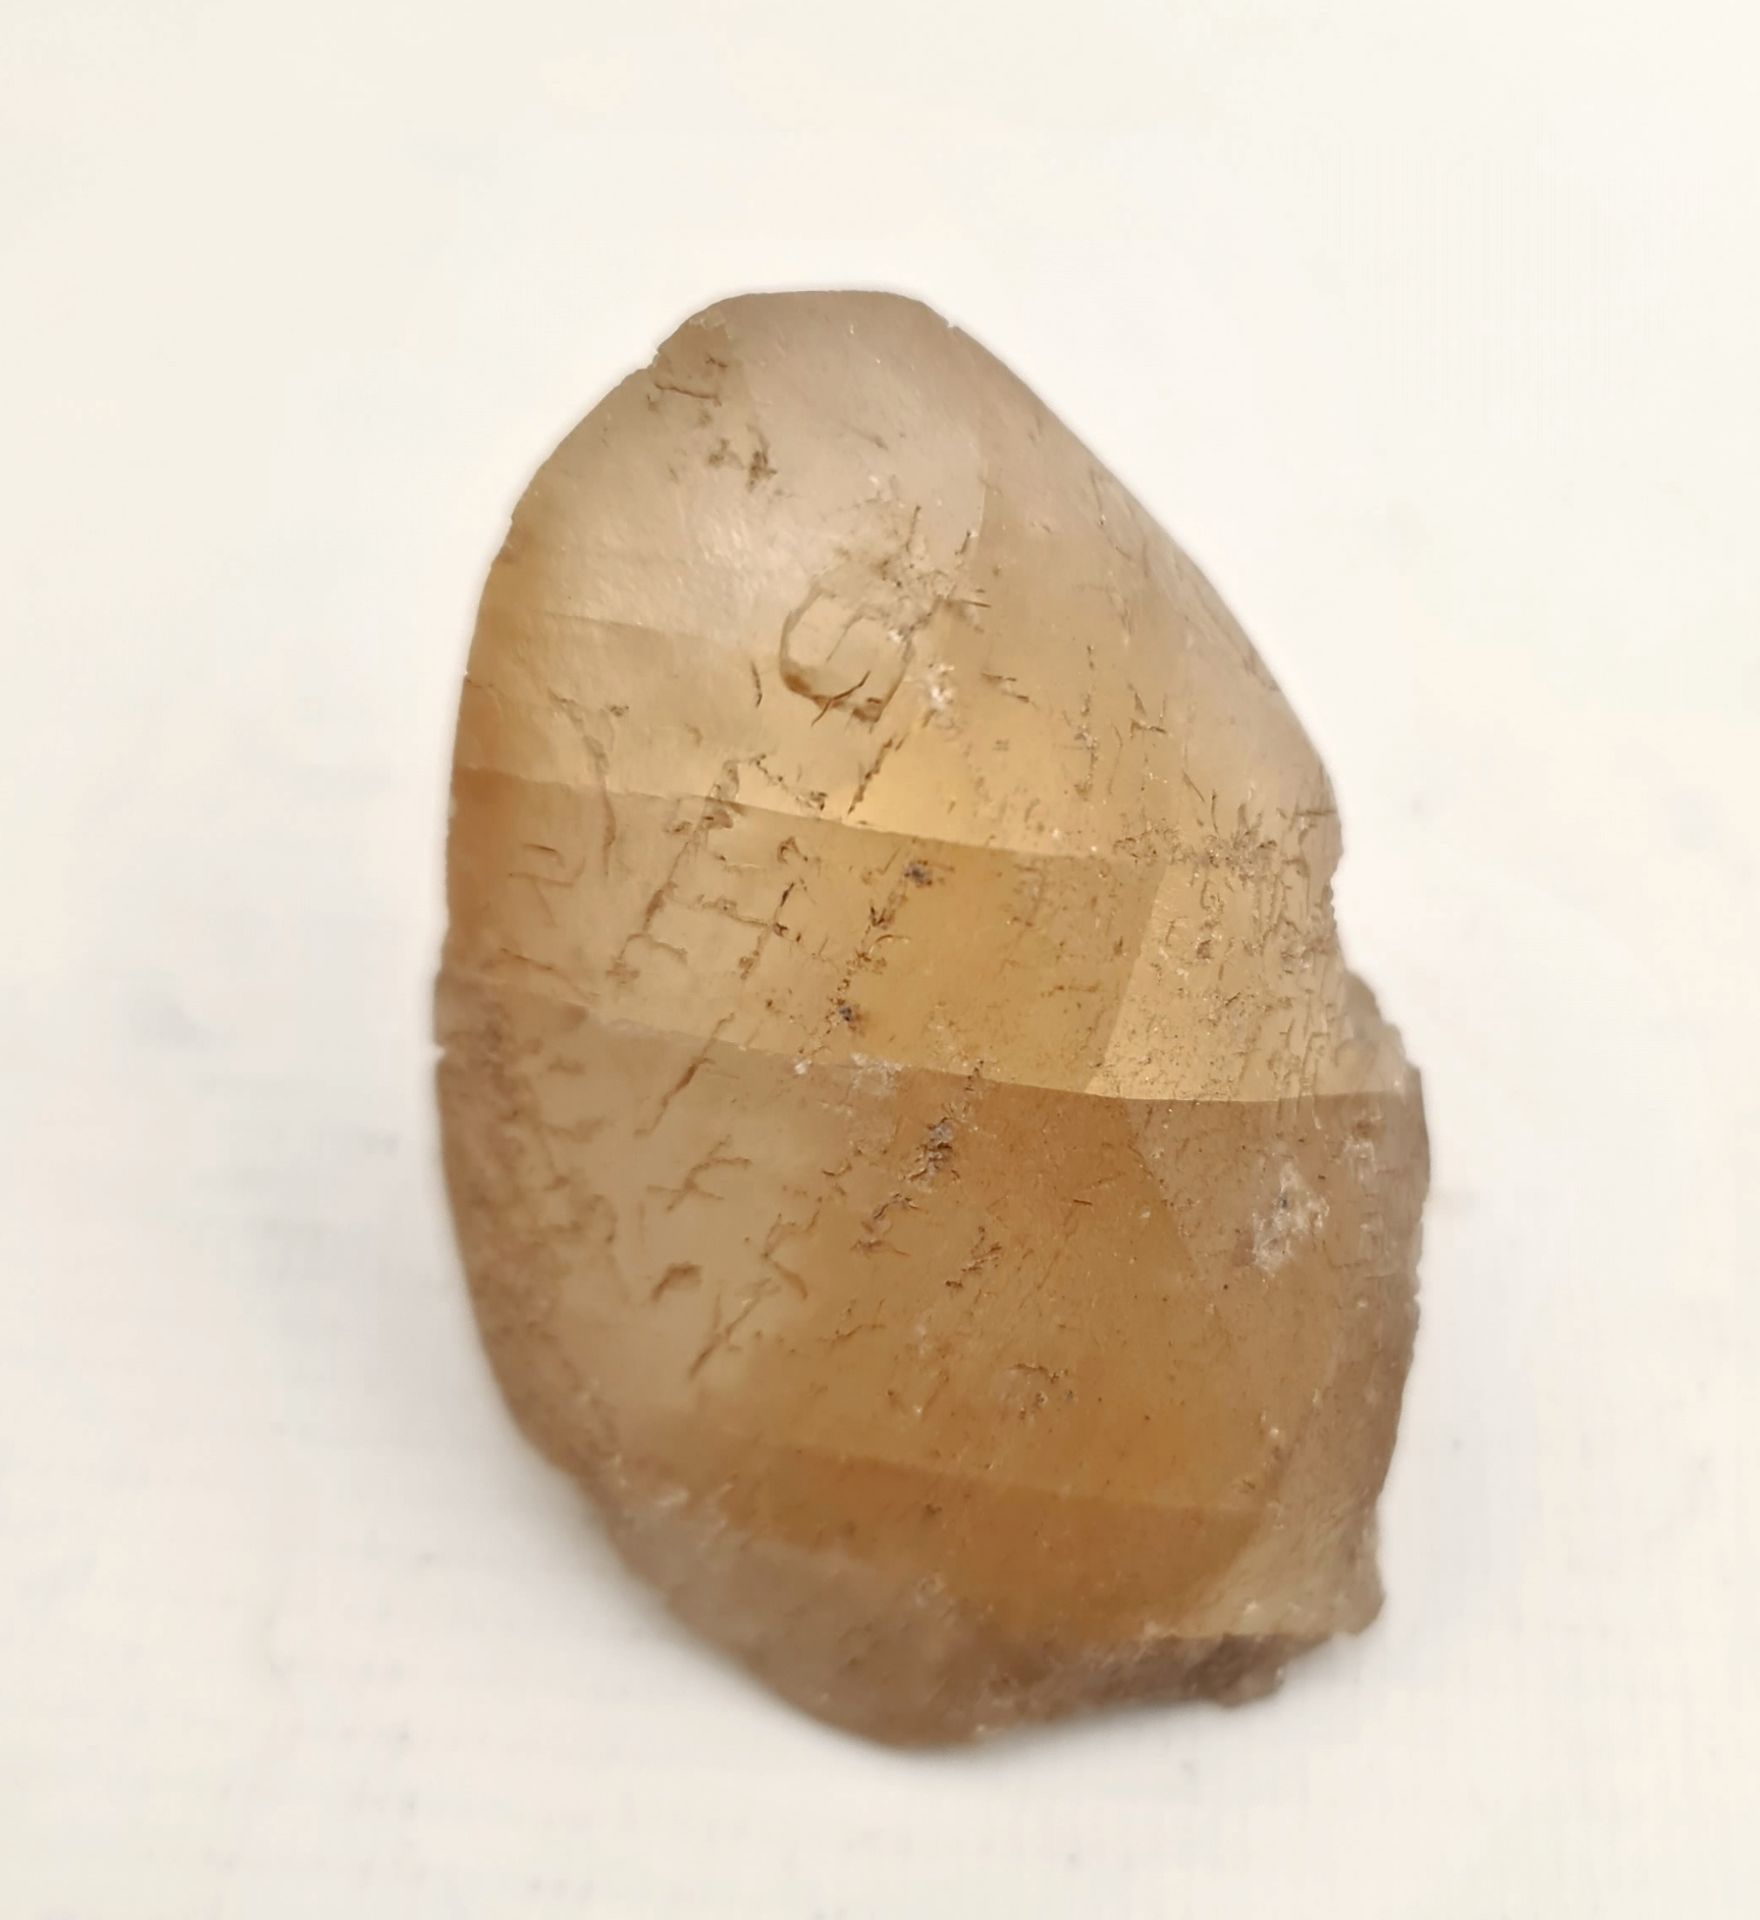 Collectable Minerals Single Dog Tooth Calcite Crystal Weight 163g. Measures 3 inches tall - Image 2 of 2